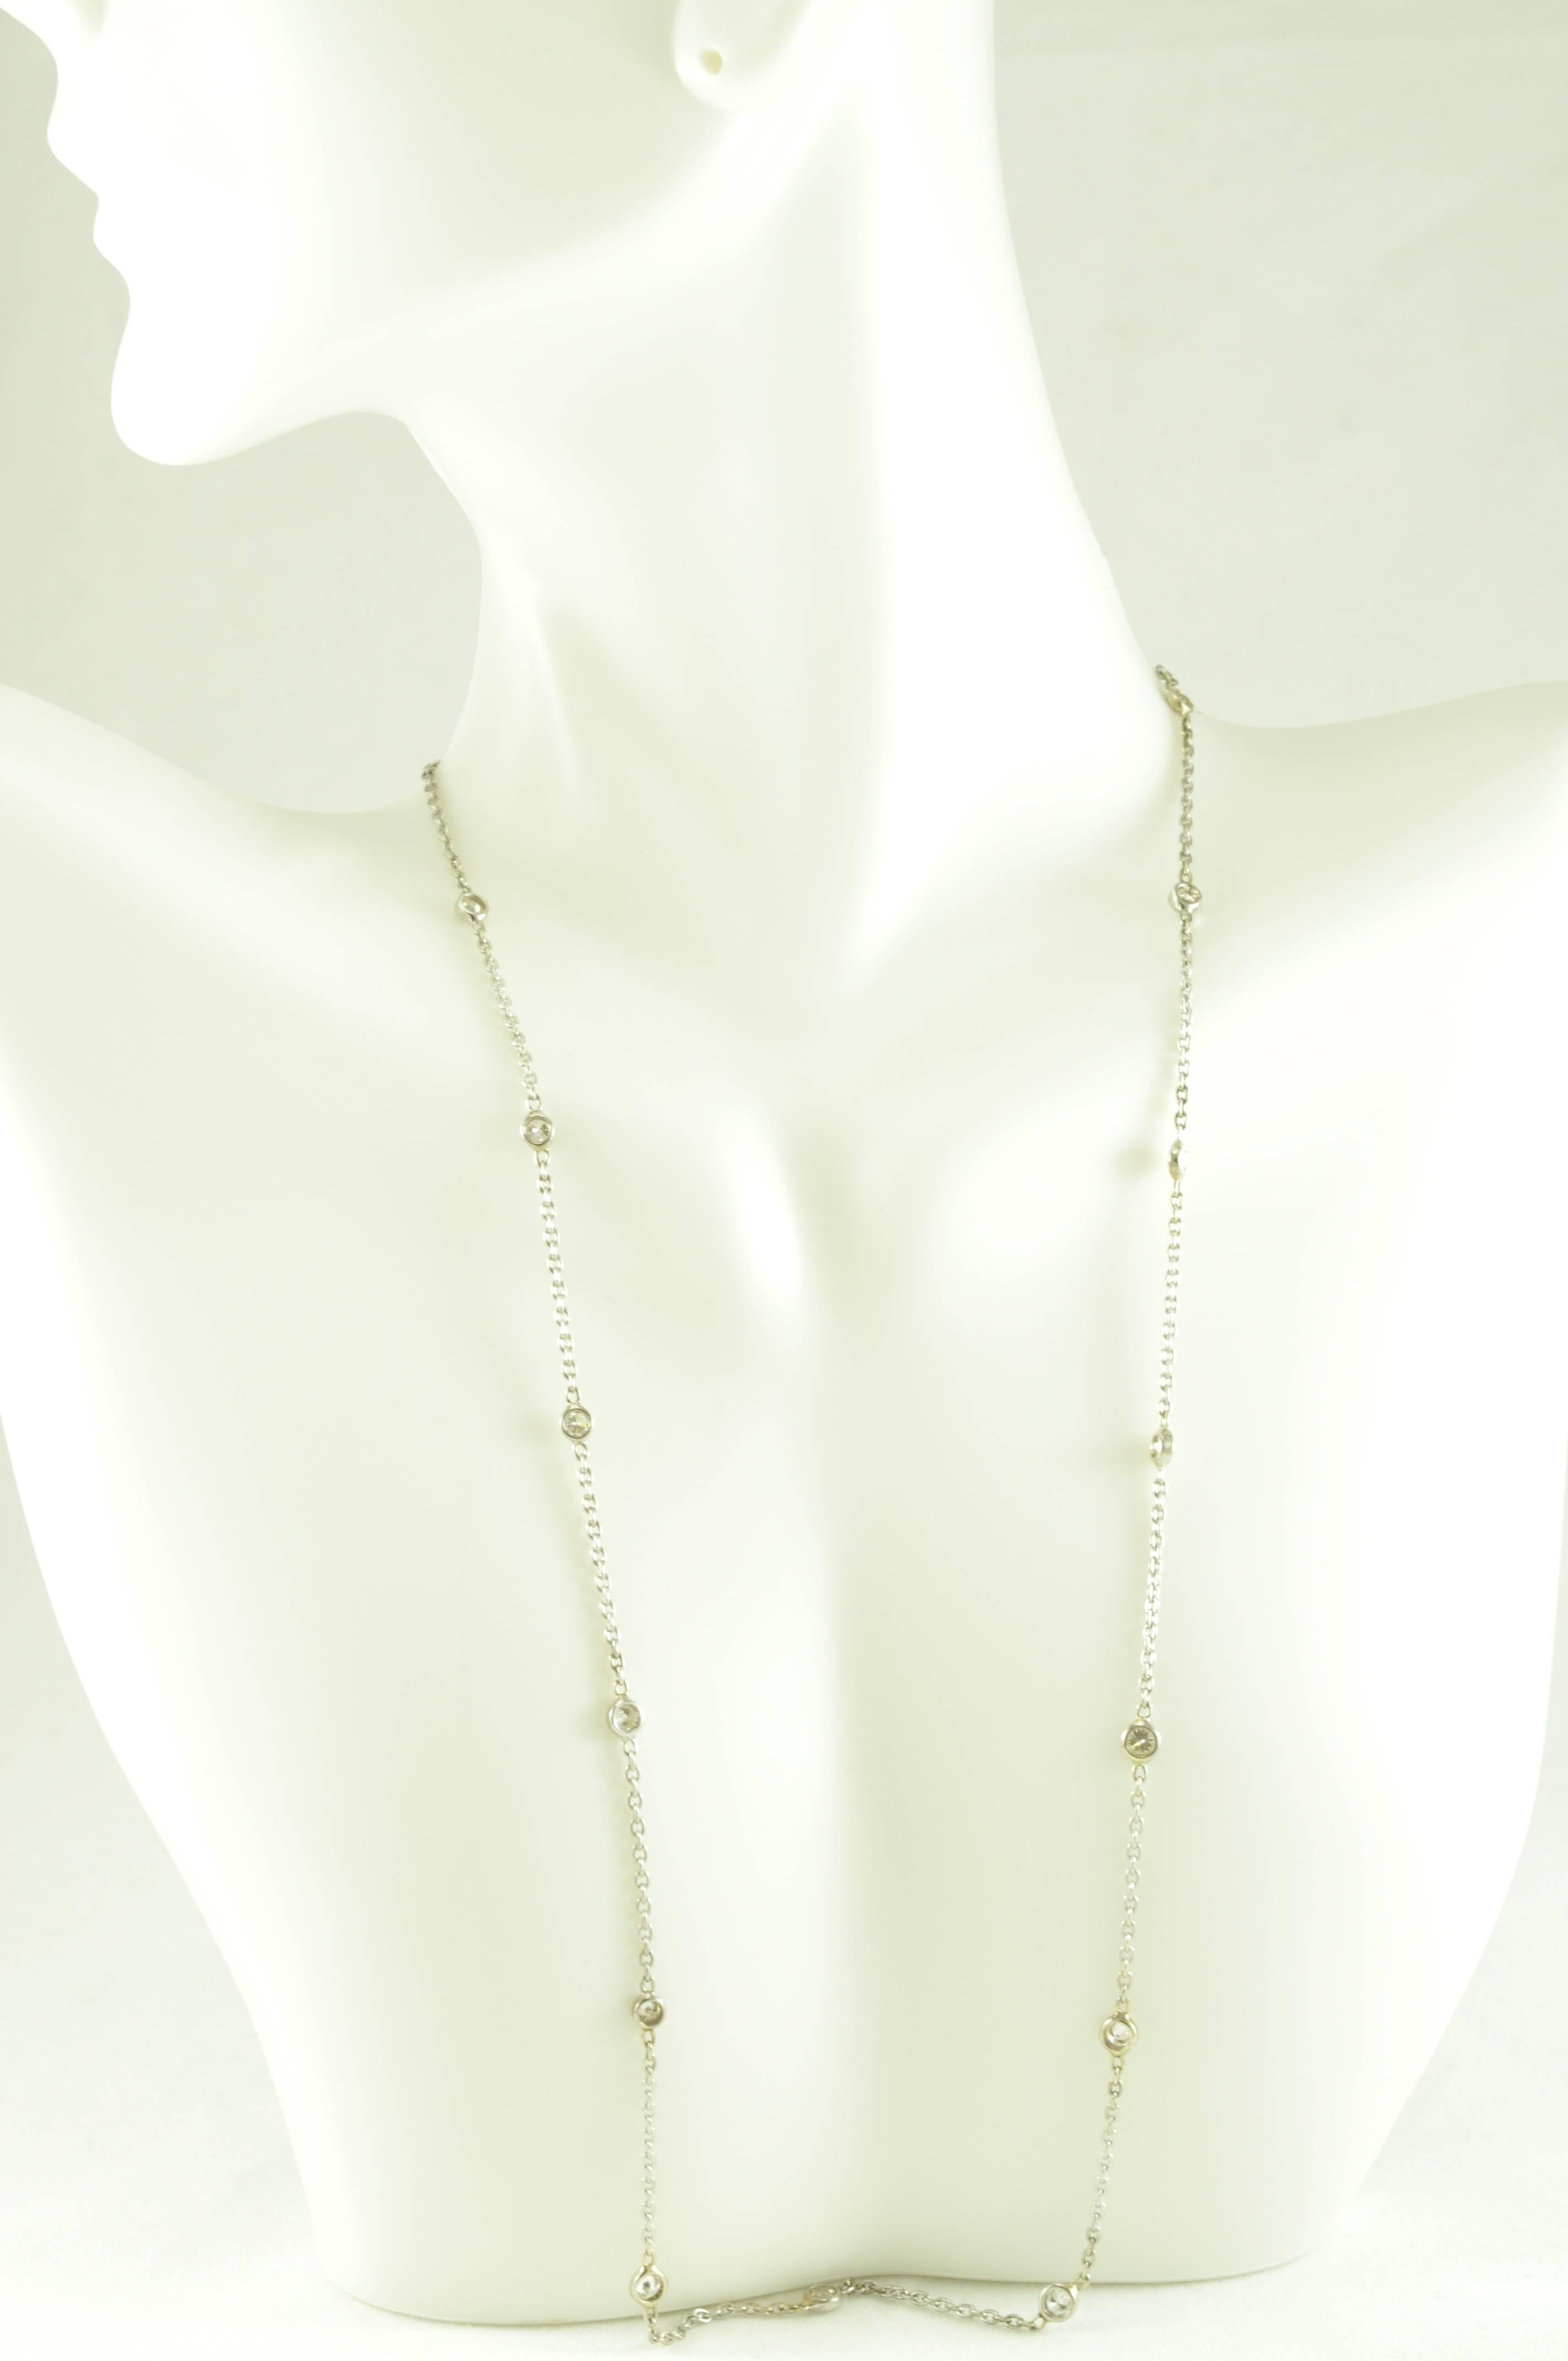 Bezel Set Diamond Necklace in 14K White Gold.
17 inches long with .97CTW with 16 Bezel Set Diamonds.